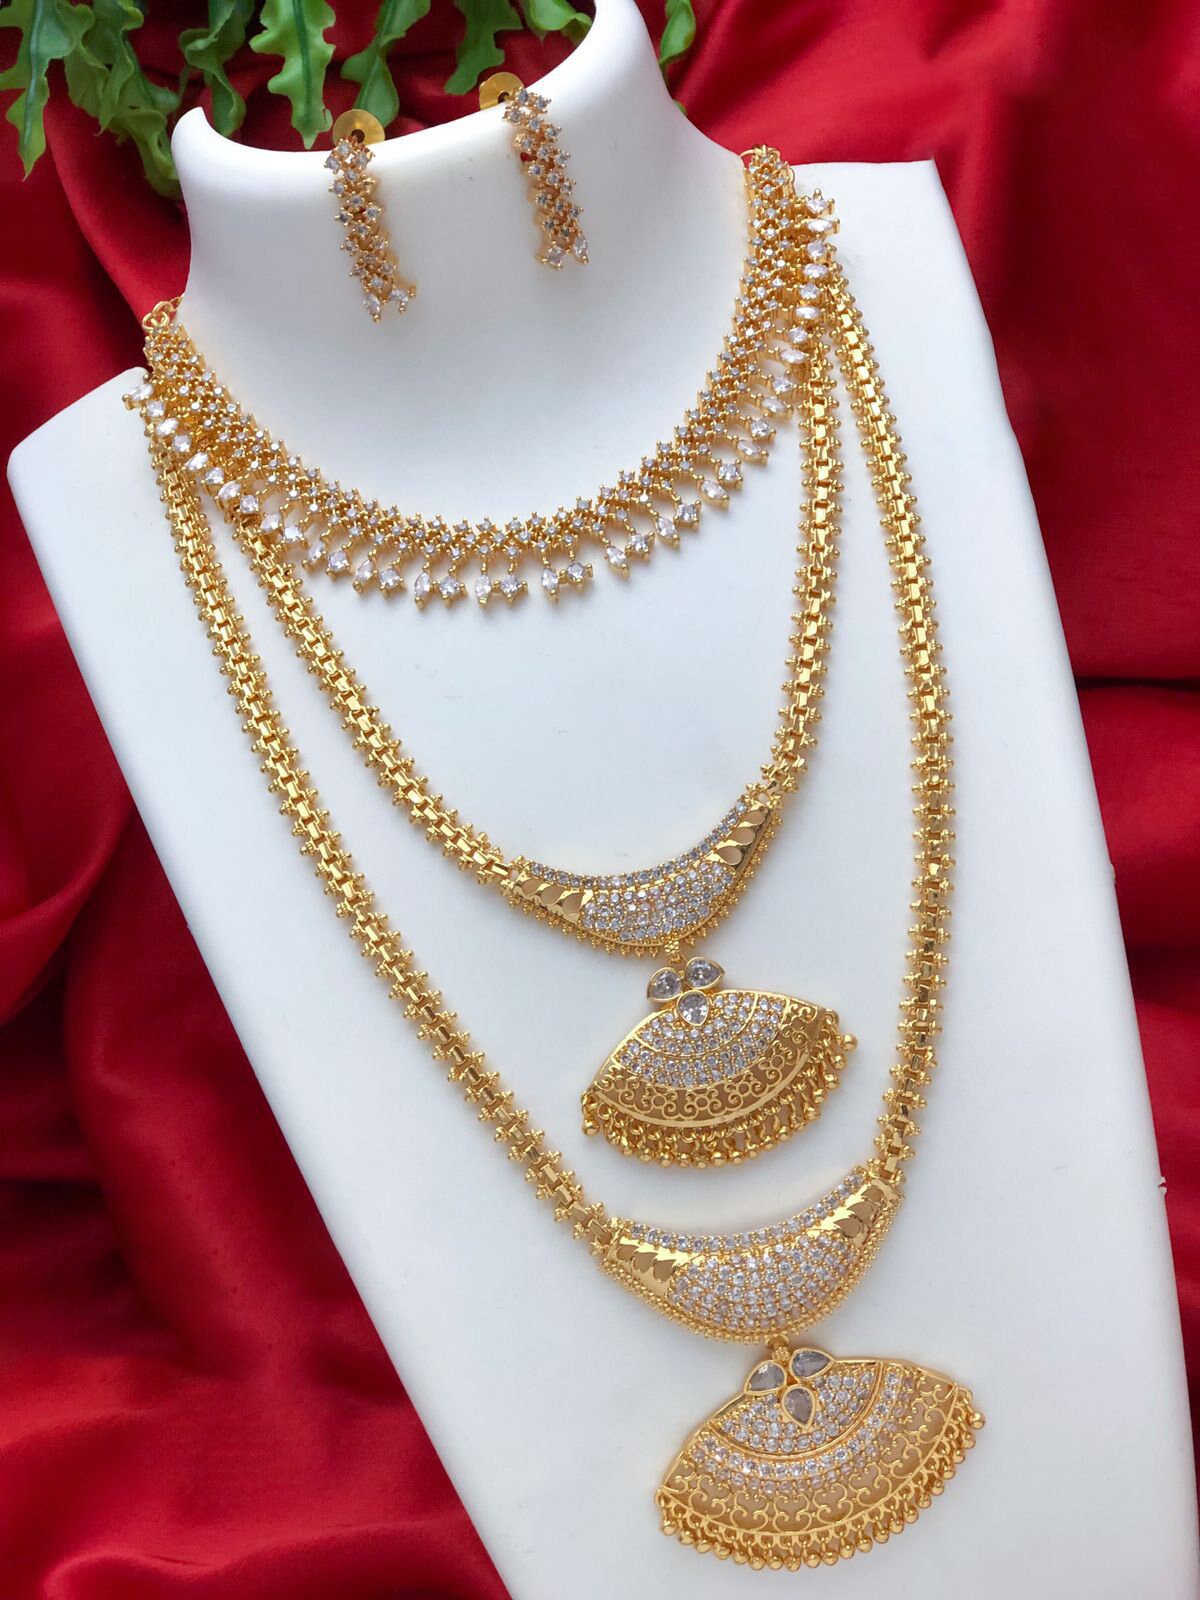 Haathi Long Necklace Set - Laura Designs (India)